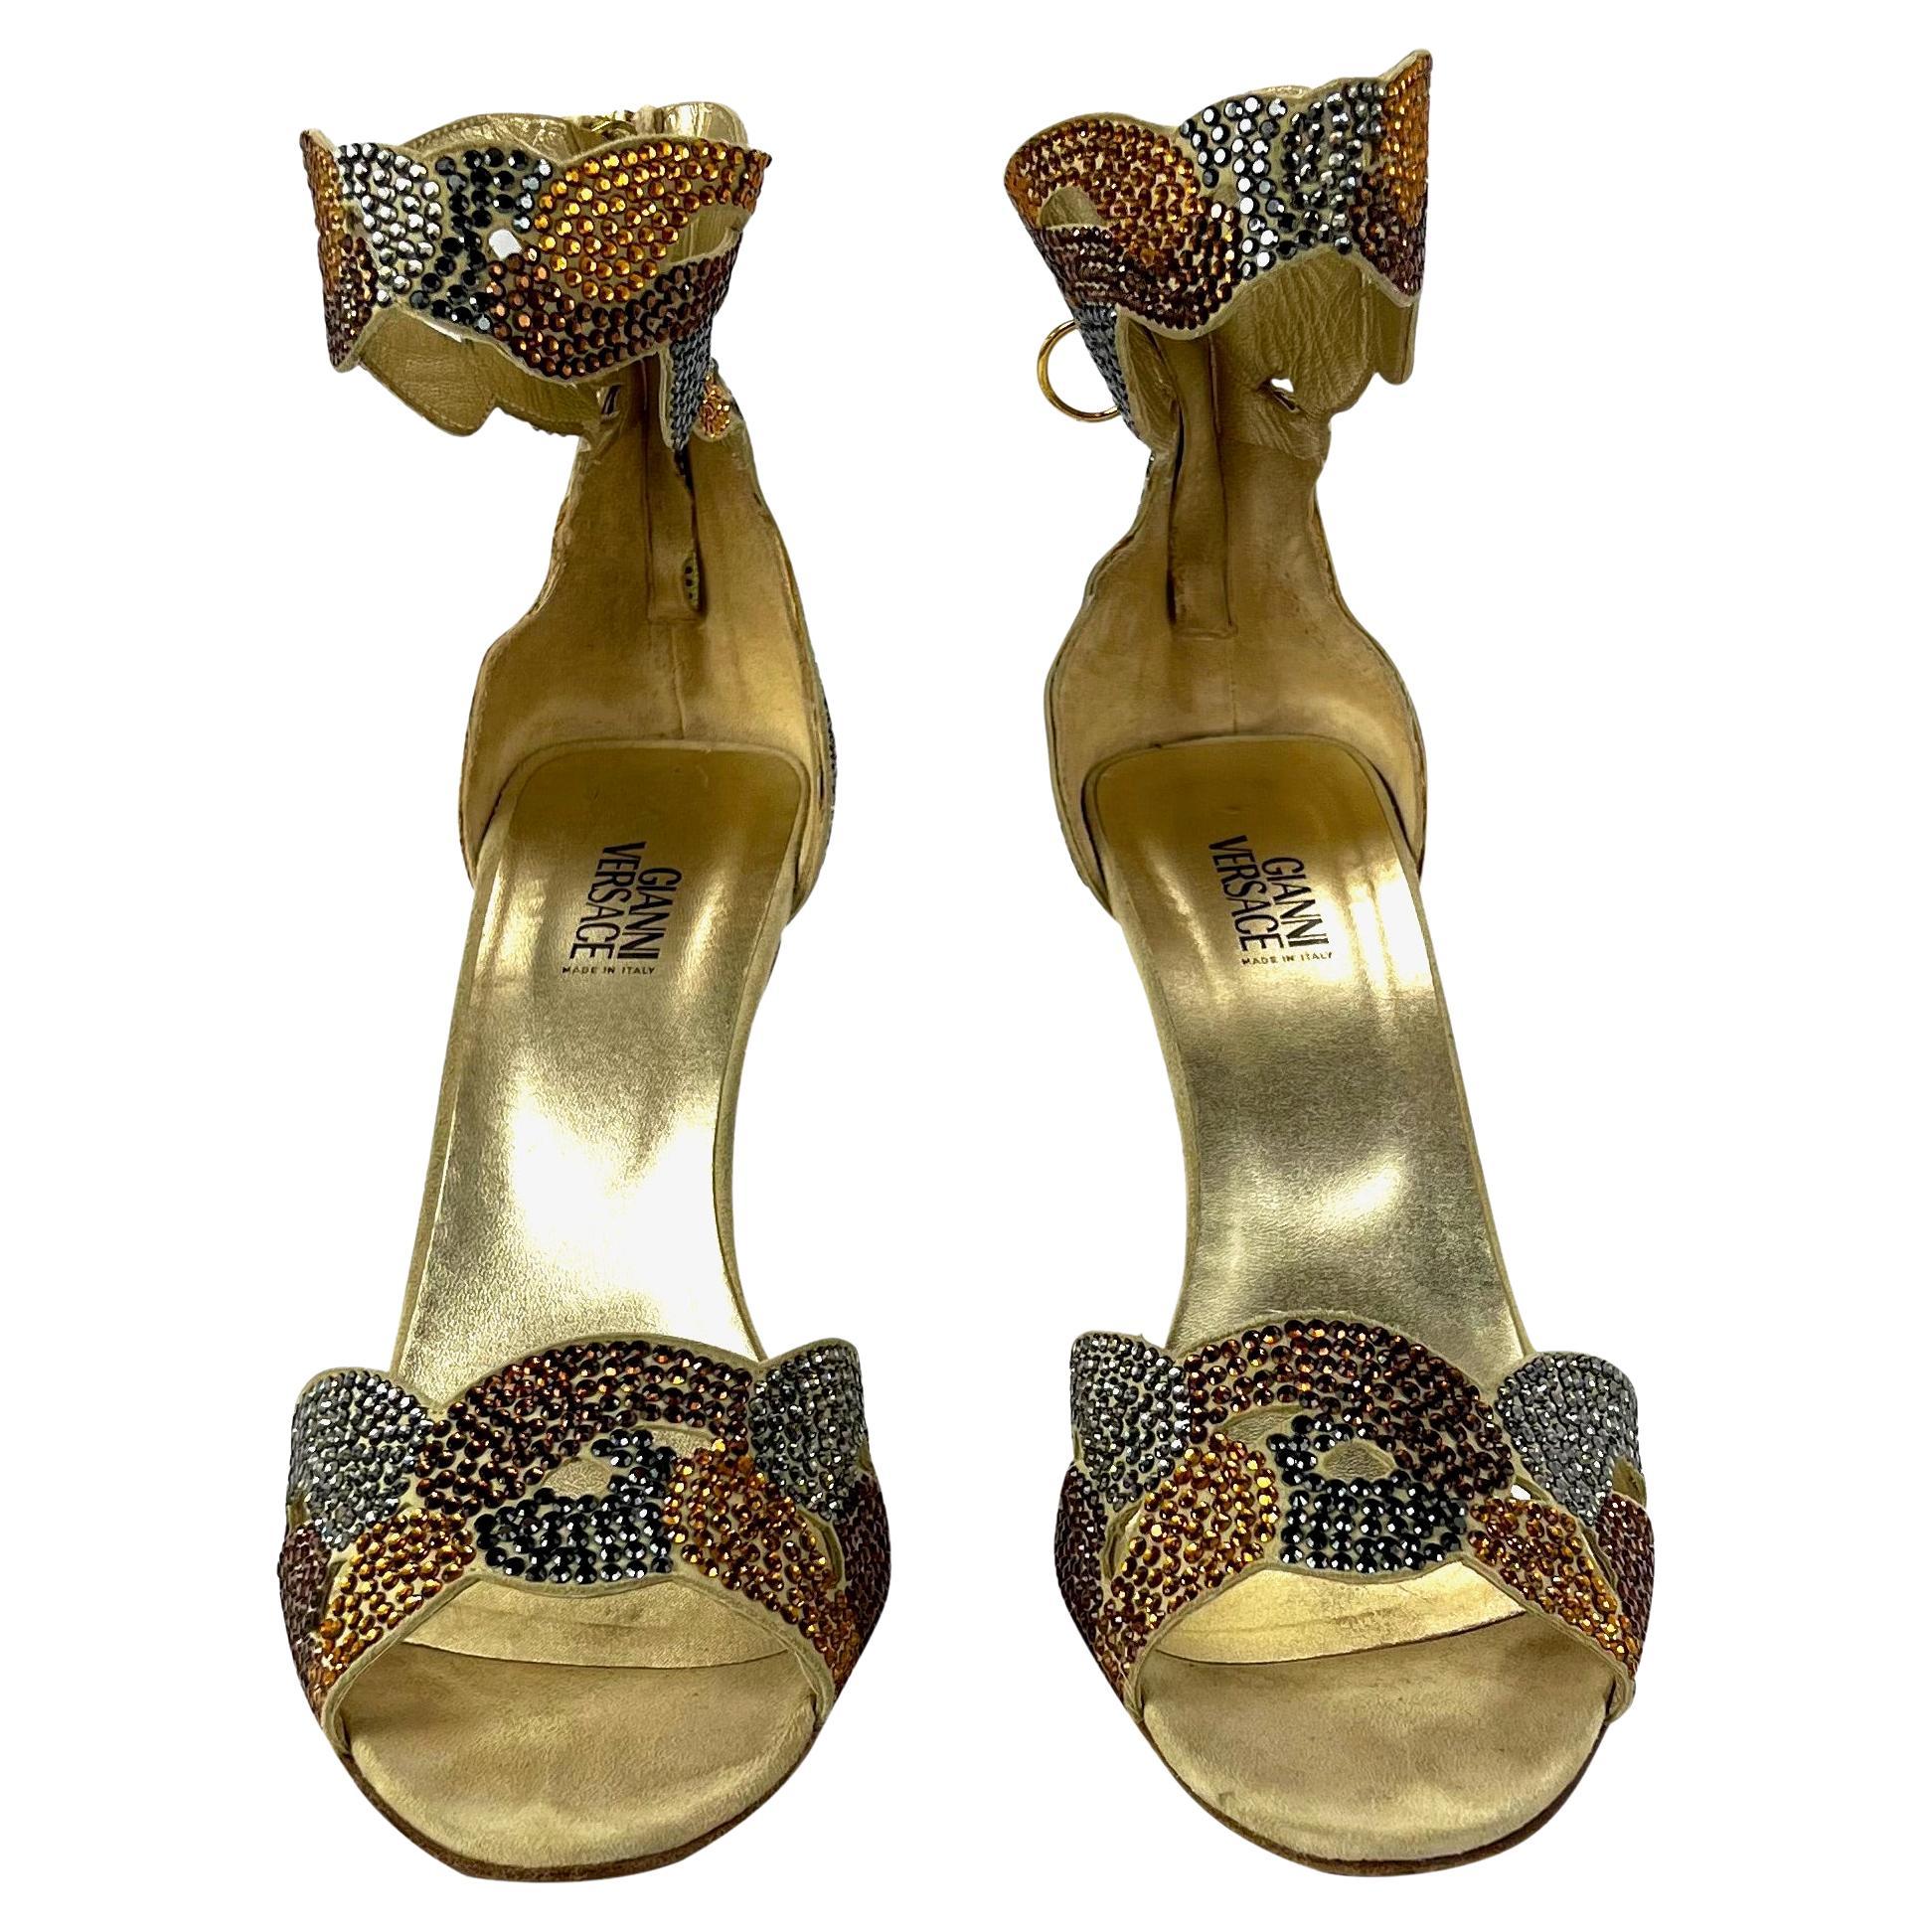 S/S 2000 Gianni Versace by Donatella Versace Crystal Pump Size 39 In Good Condition For Sale In West Hollywood, CA